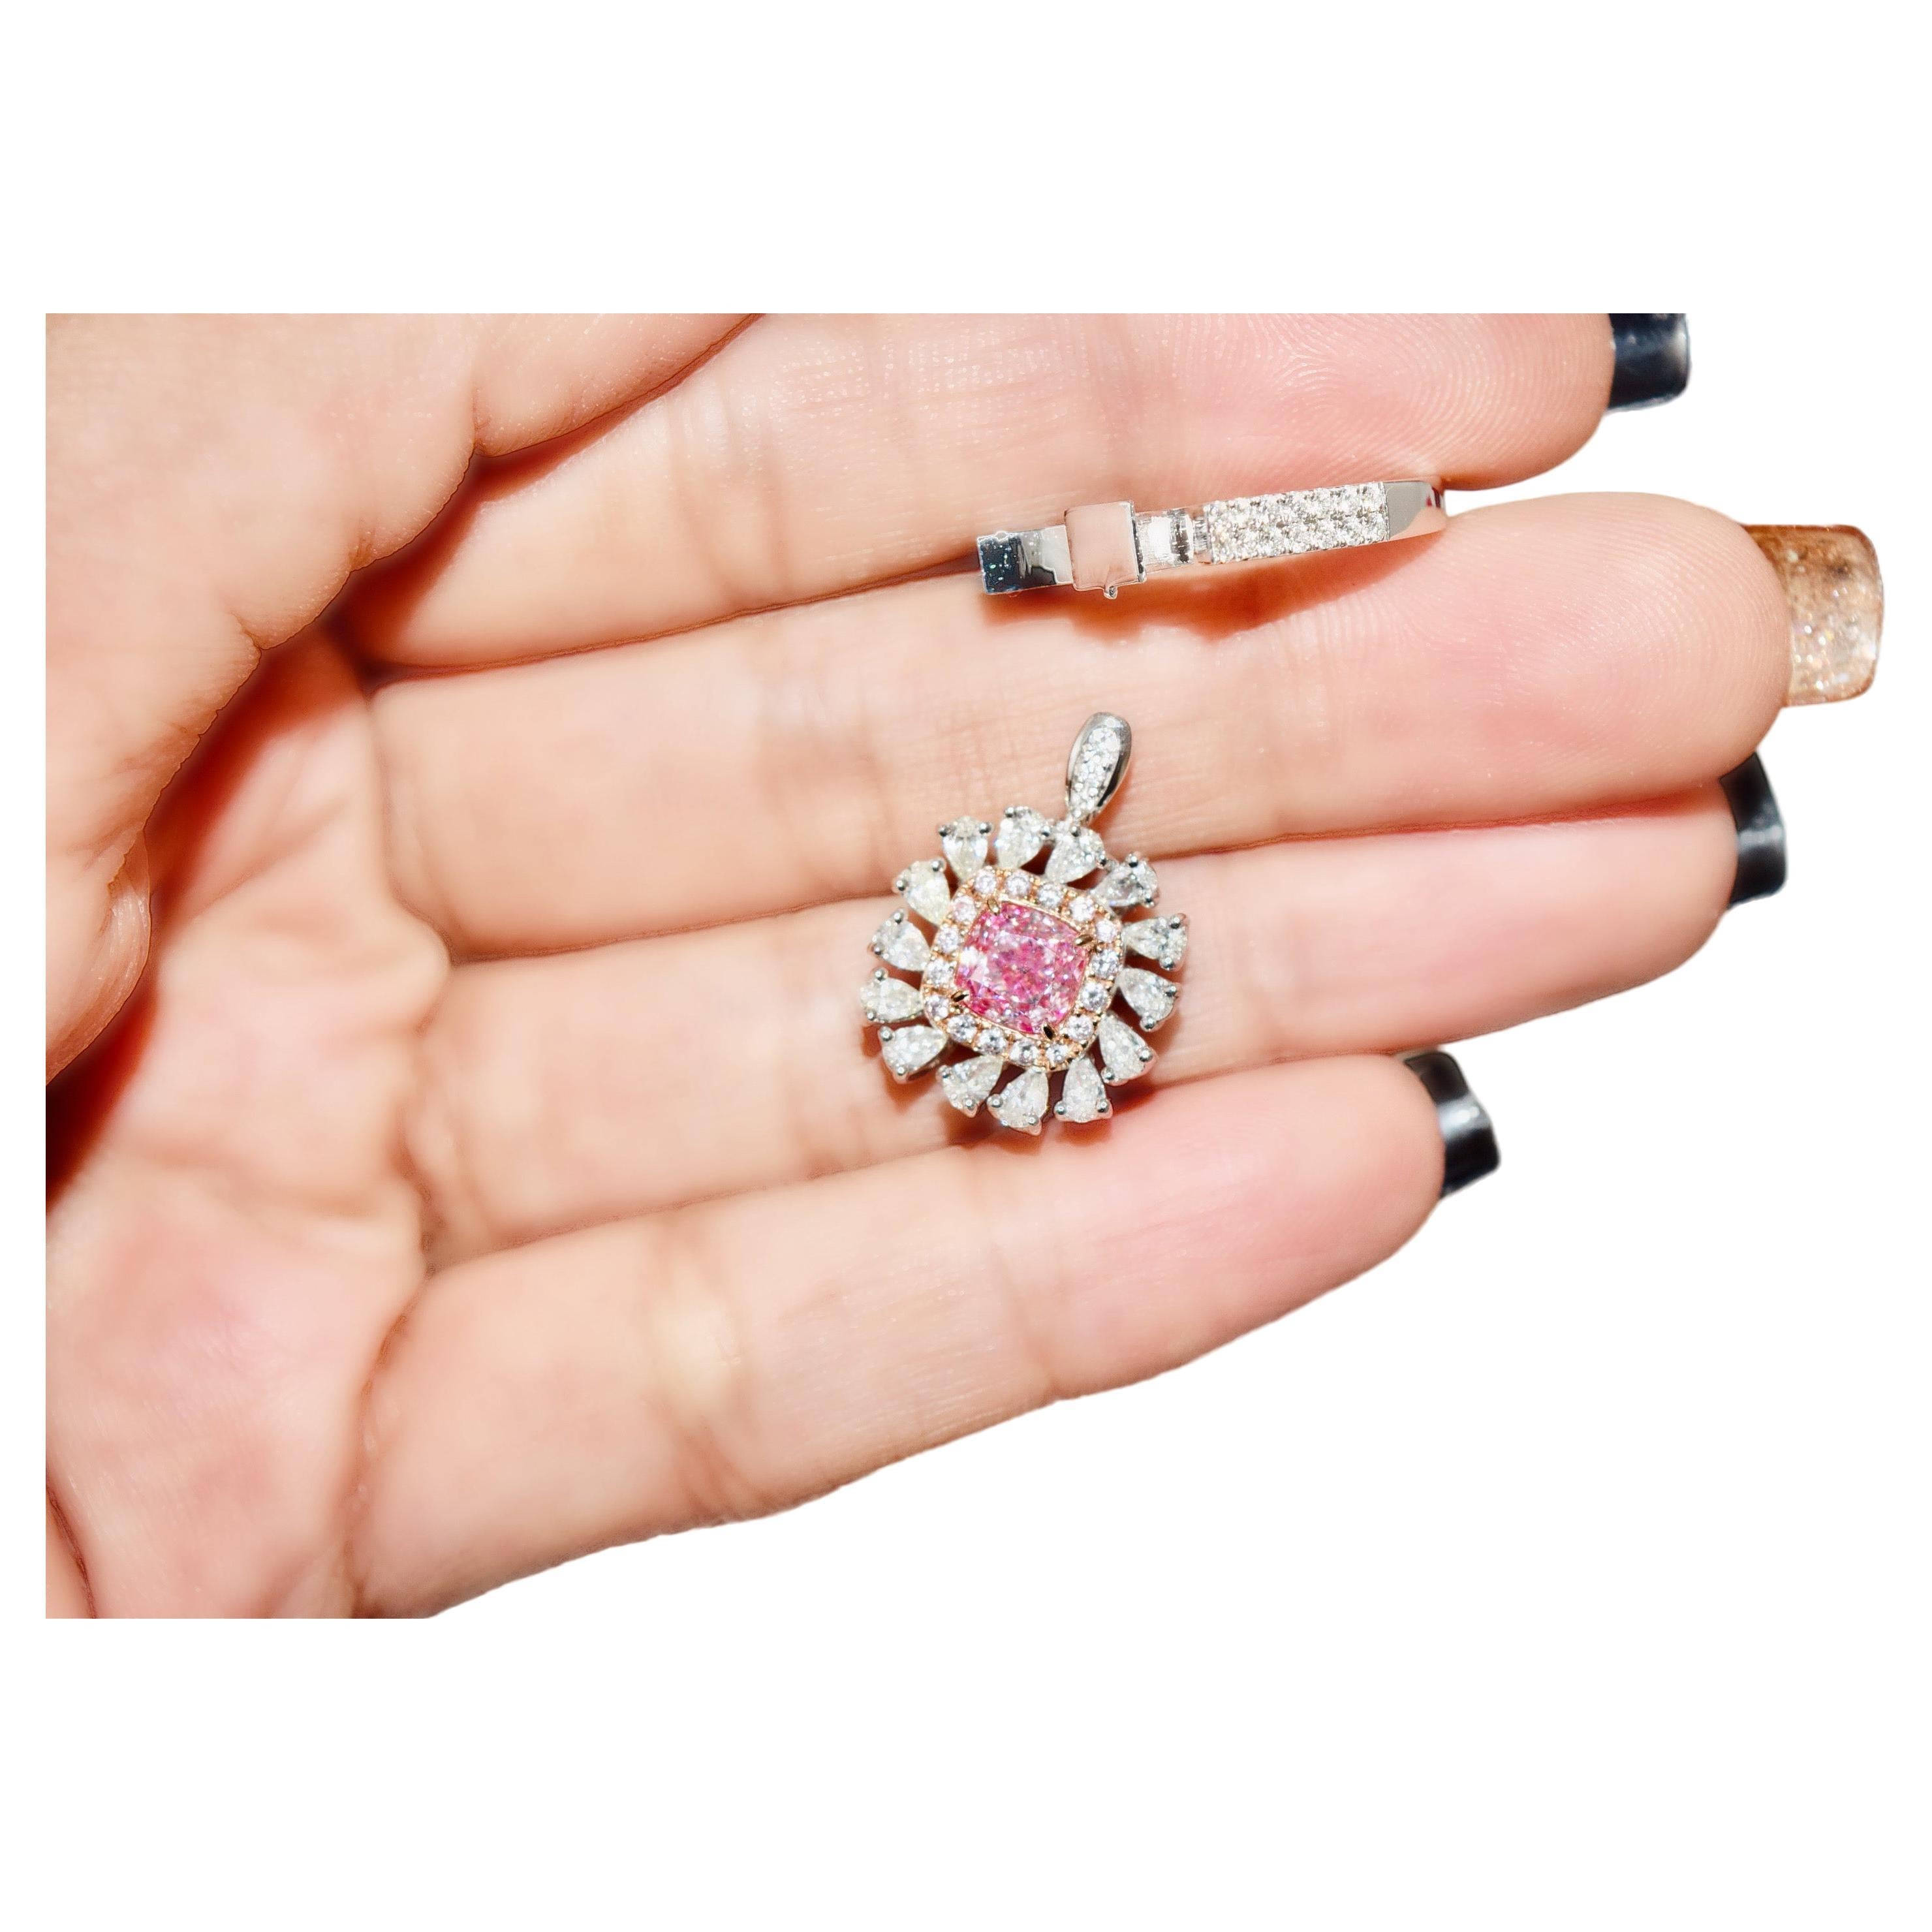 1.01 Carat Very Light Pink Diamond Ring & Pendant Convertible GIA Certfied For Sale